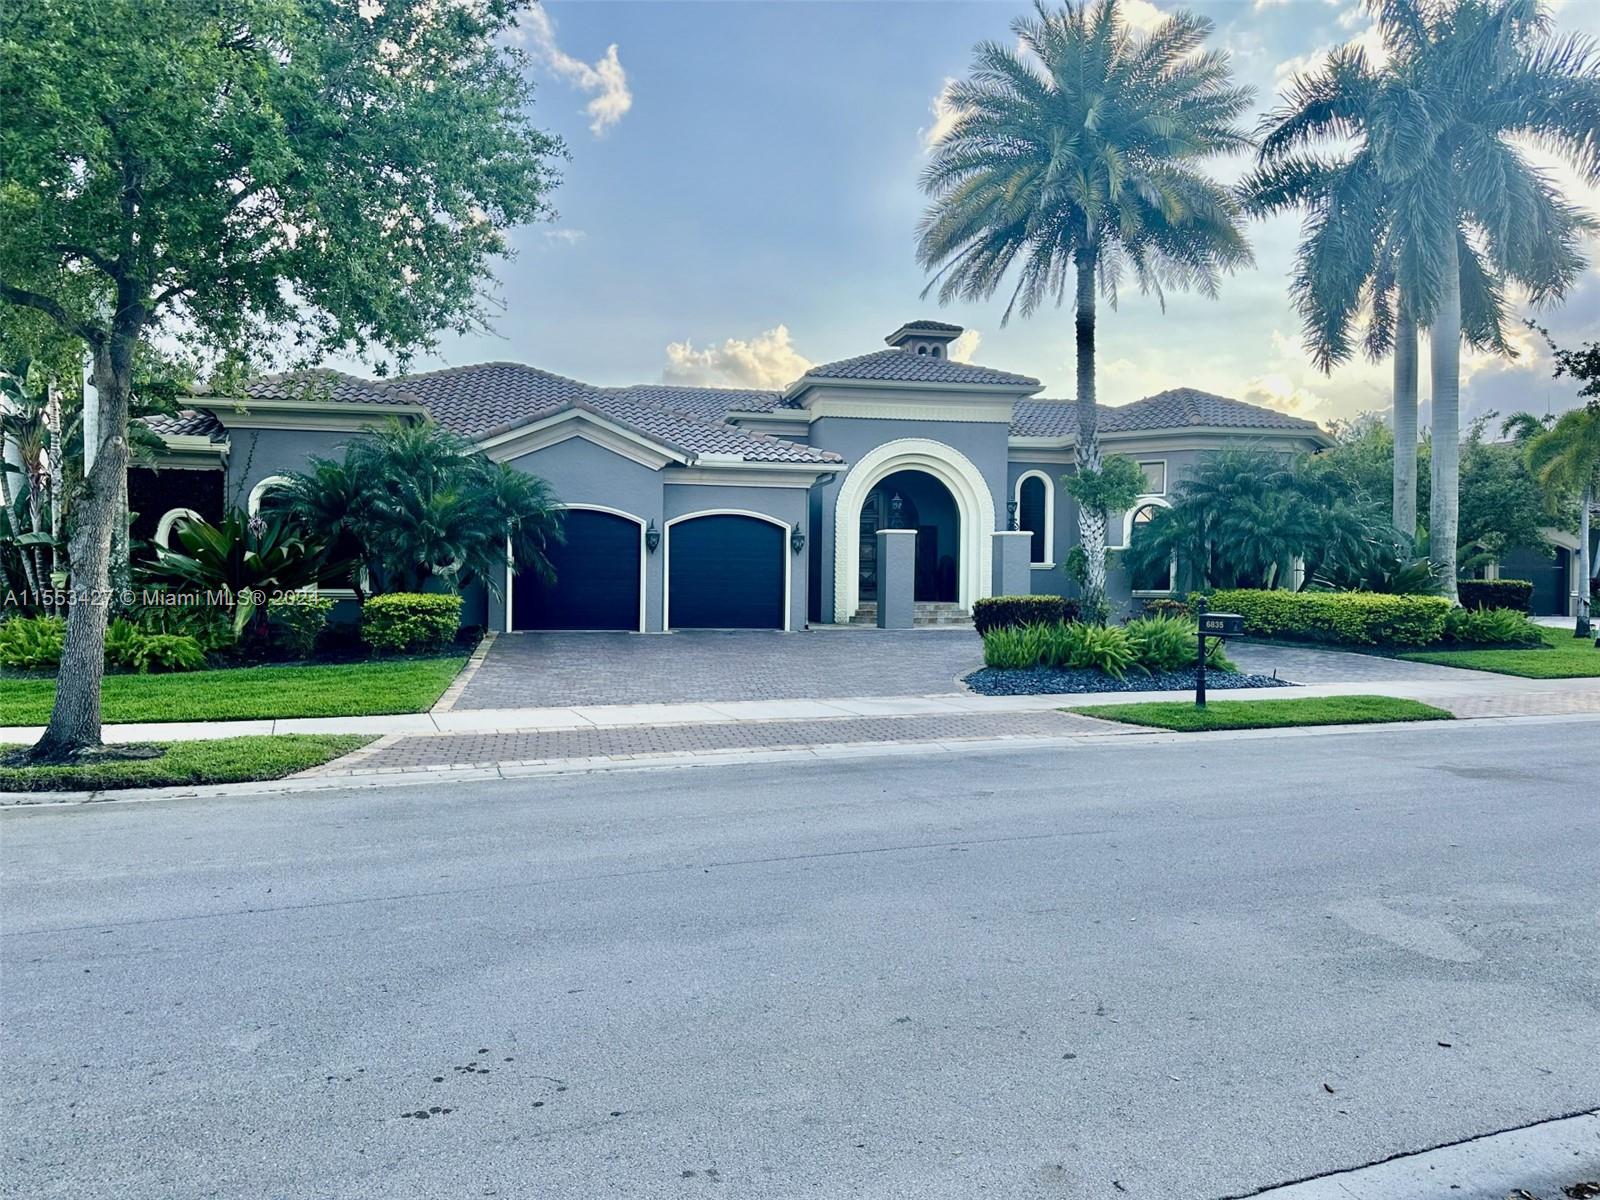 6835 NW 122nd Ave, Parkland, Florida 33076, 6 Bedrooms Bedrooms, ,5 BathroomsBathrooms,Residential,For Sale,6835 NW 122nd Ave,A11553427